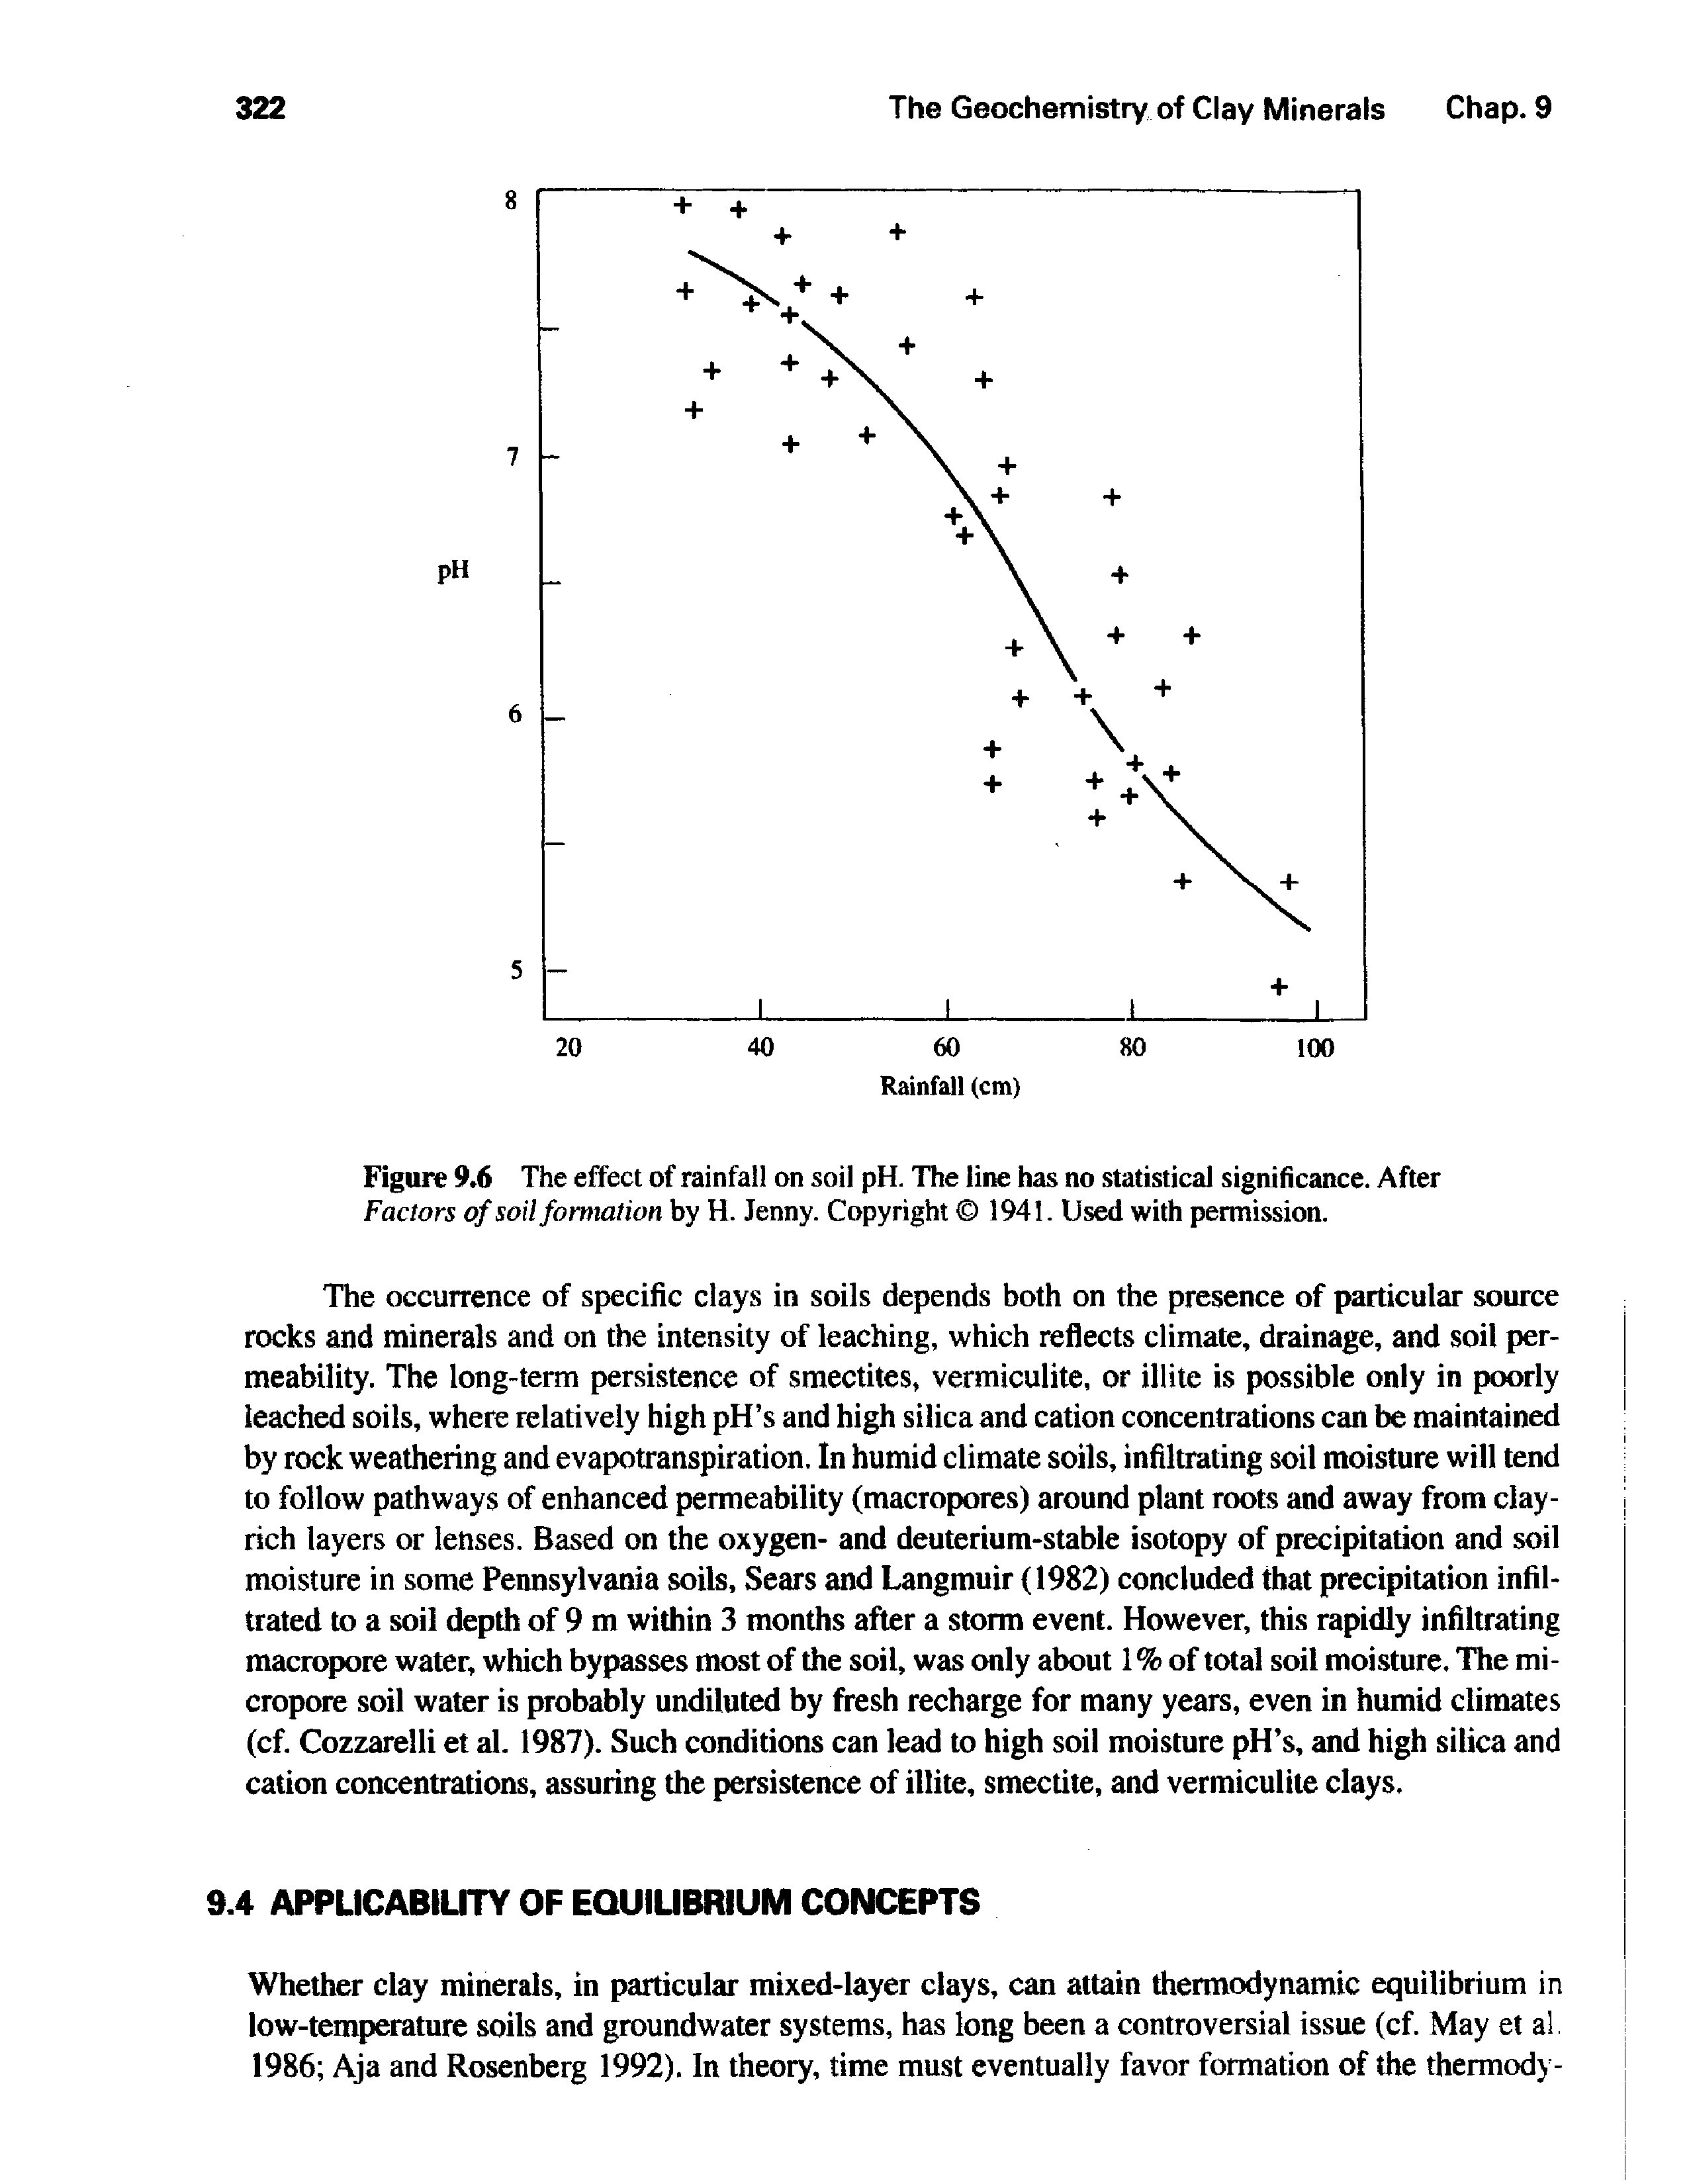 Figure 9.6 The effect of rainfall on soil pH. The line has no statistical significance. After Factors of soil formation by H. Jenny. Copyright 1941. Used with permission.